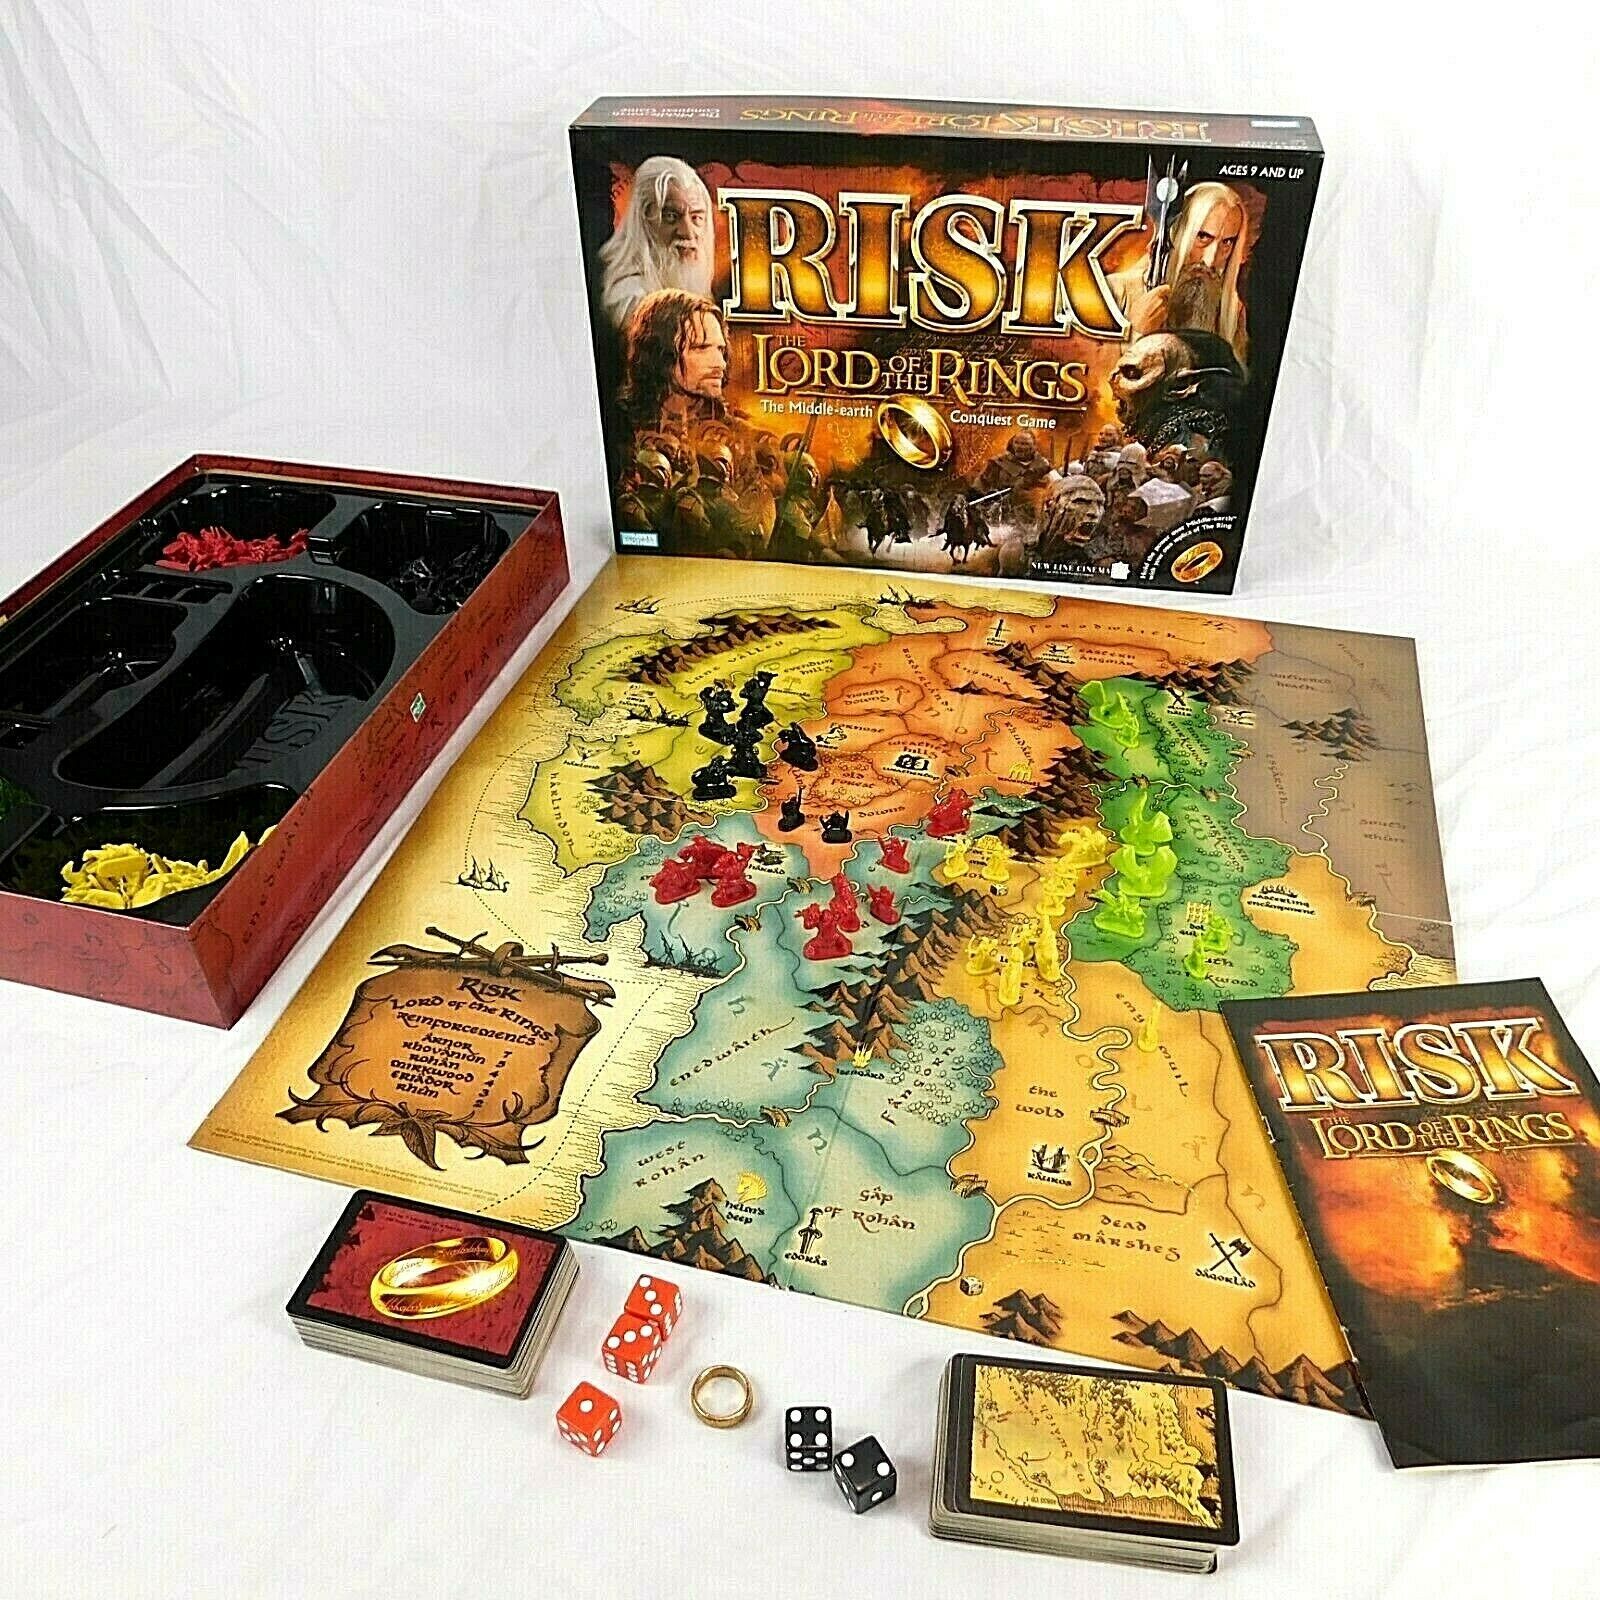 Risk The Lord of the Rings Middle Earth Conquest Game 2002 Complete LOTR Ring - $54.99